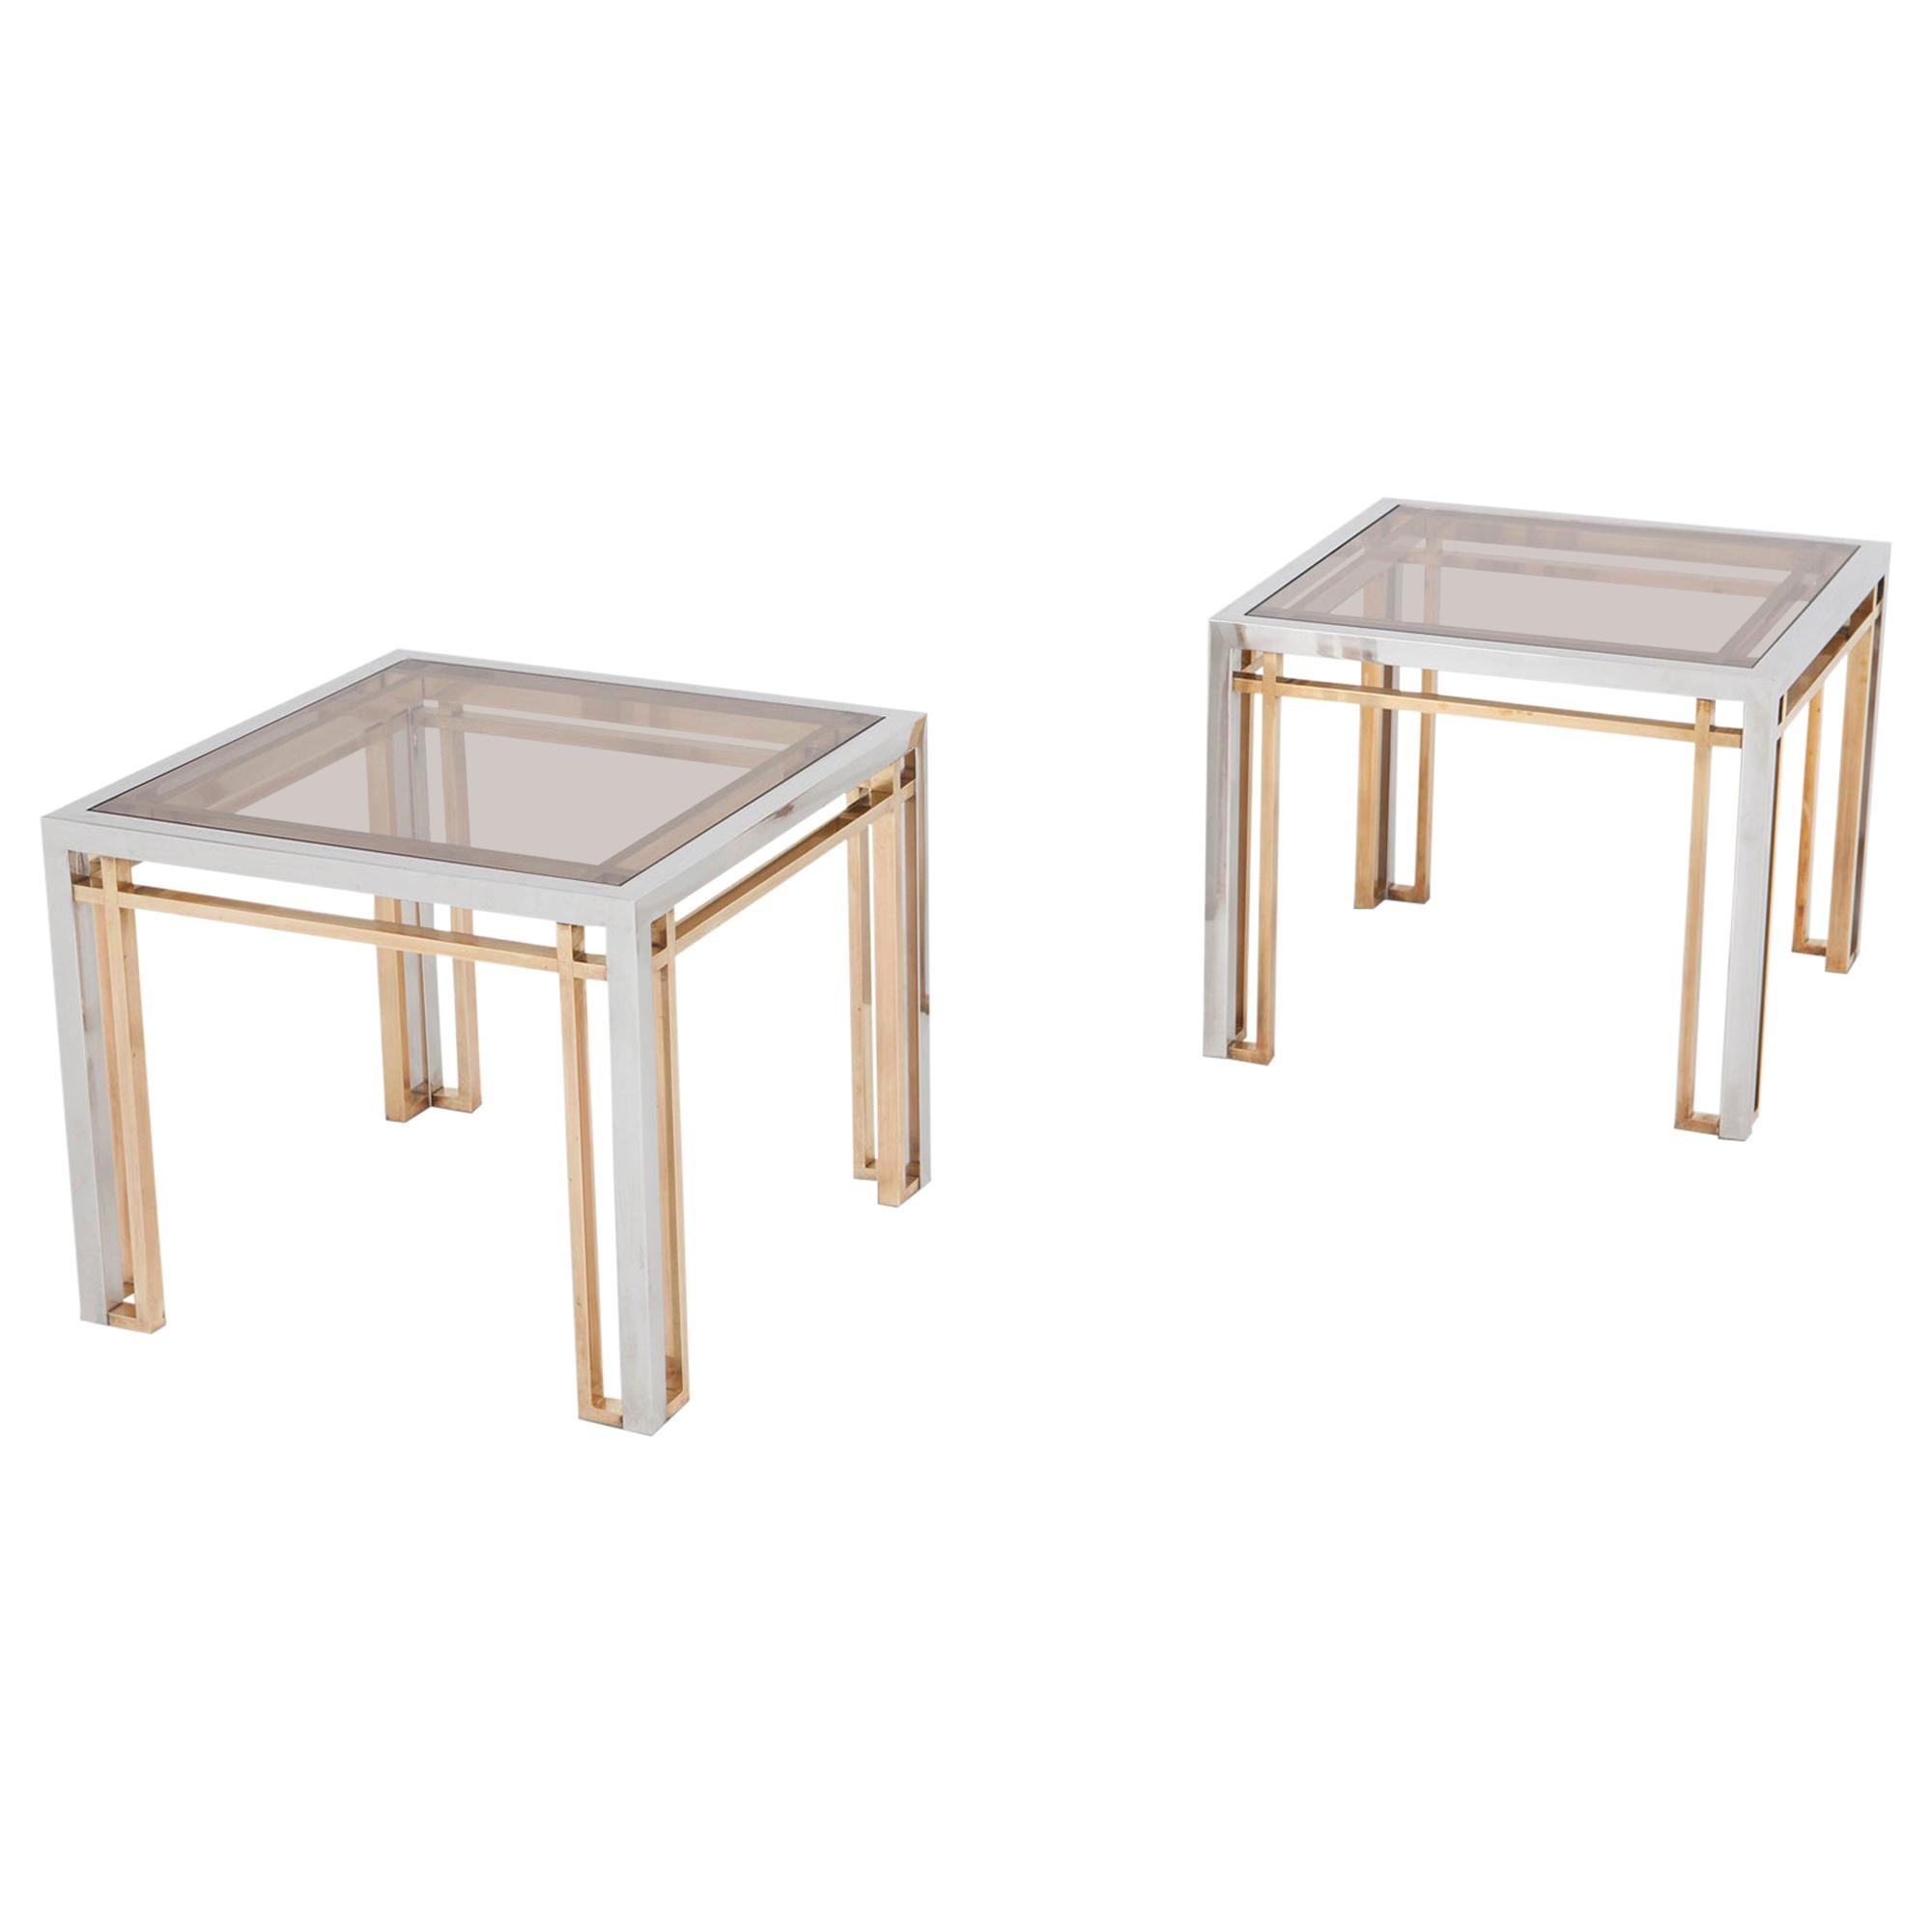 Romeo Rega Side Tables in Chrome, Brass and Glass